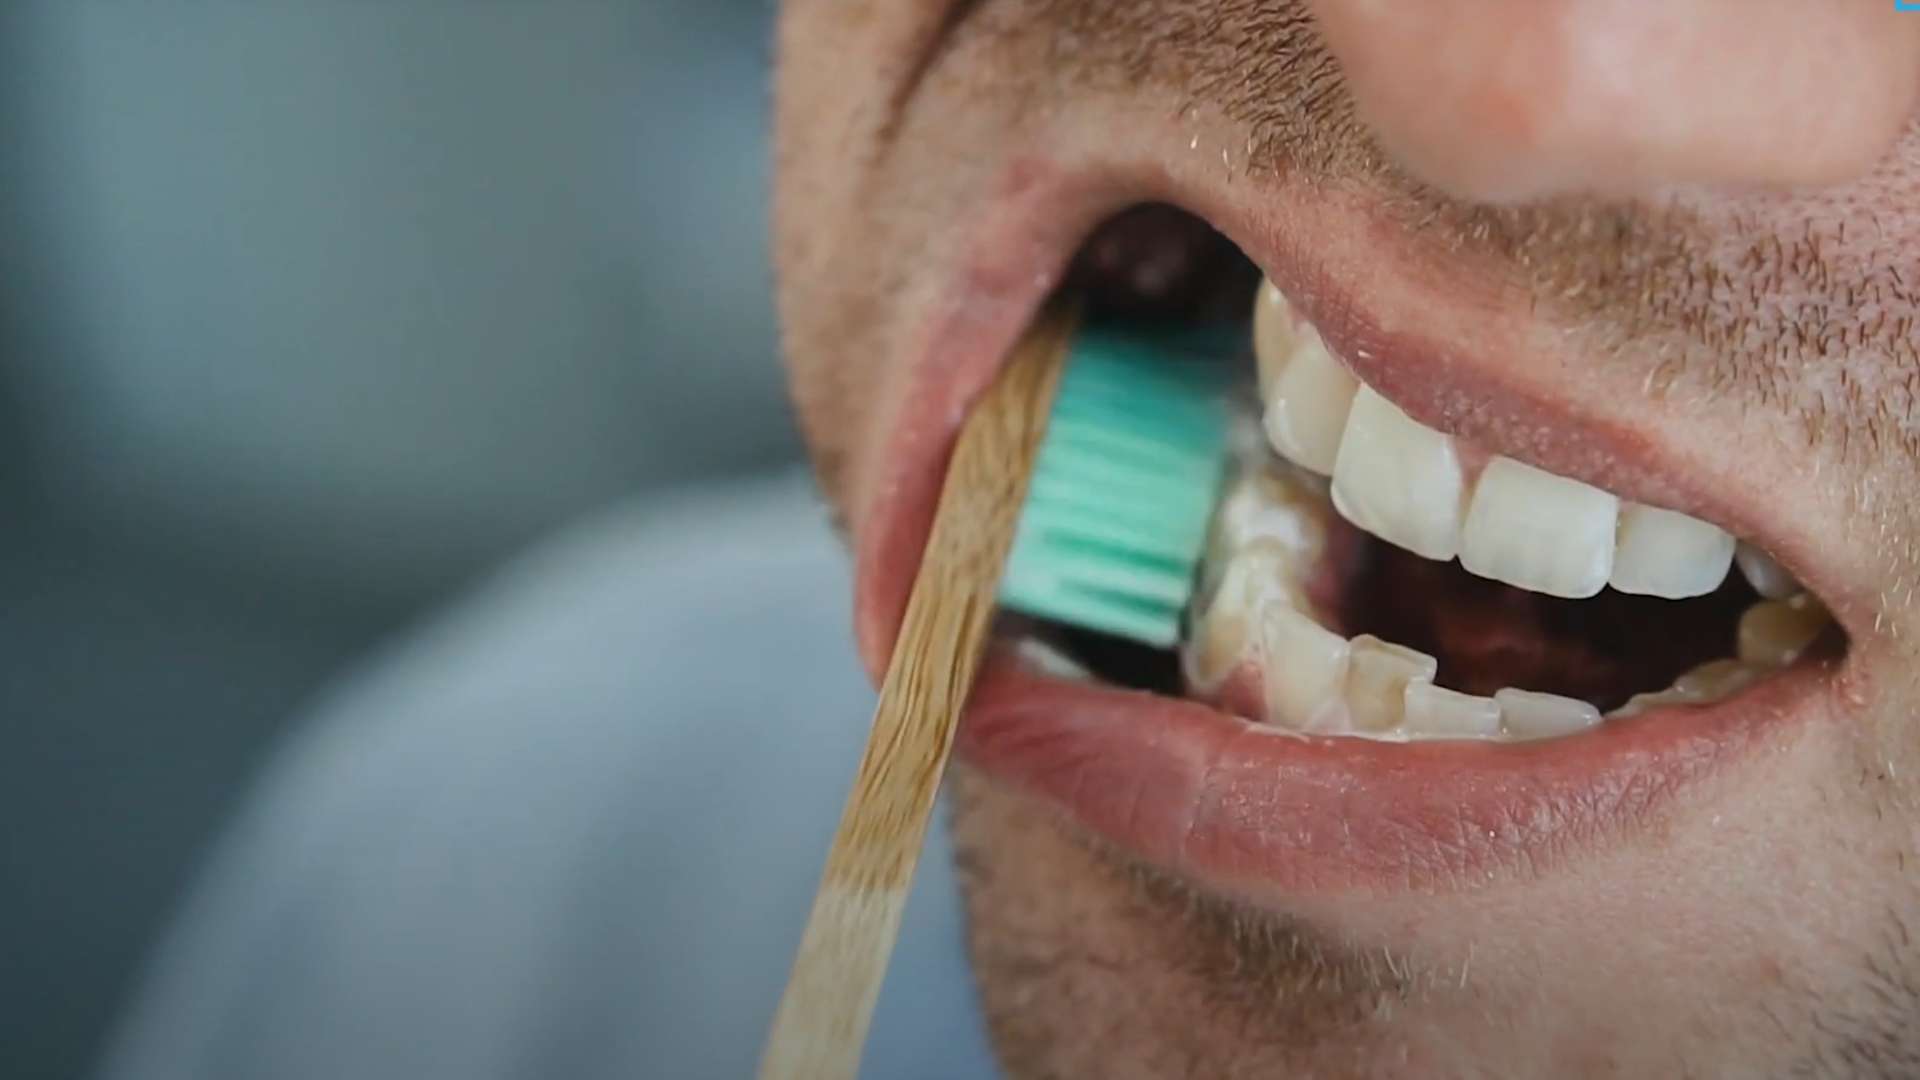 Manual toothbrush in mouth